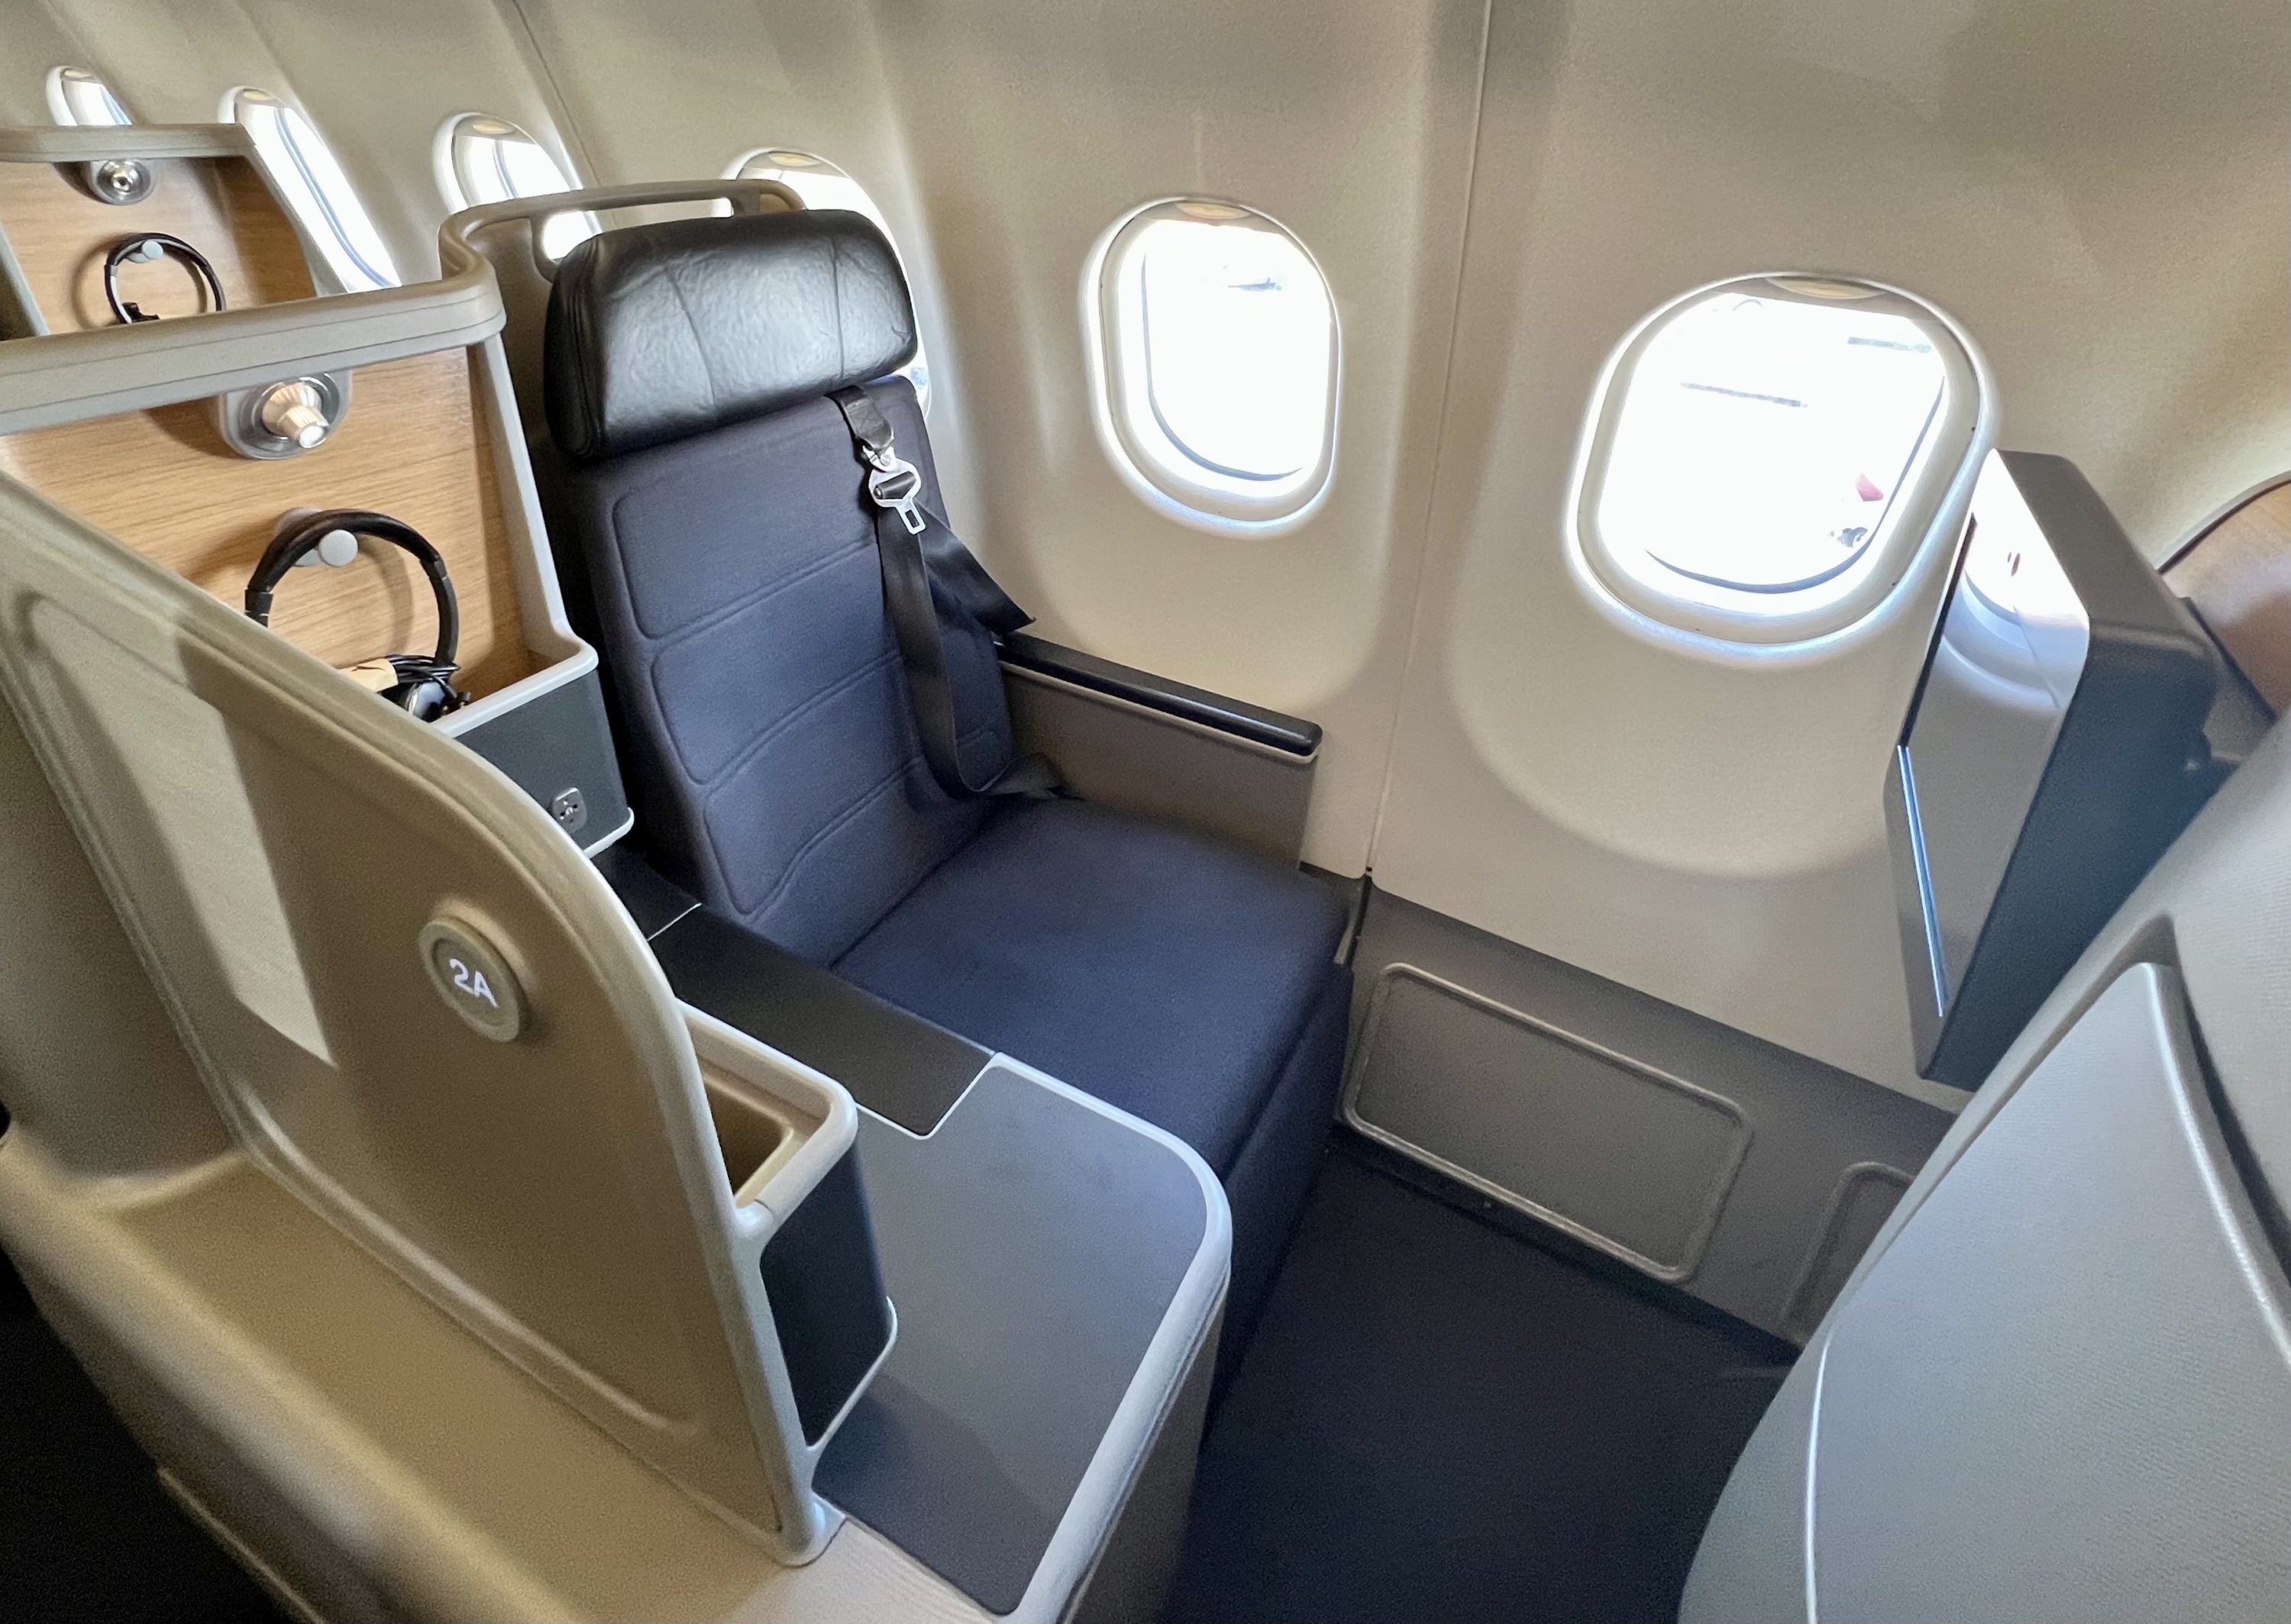 The Qantas business class seat that youll find on the A330 from LA to Brisbane